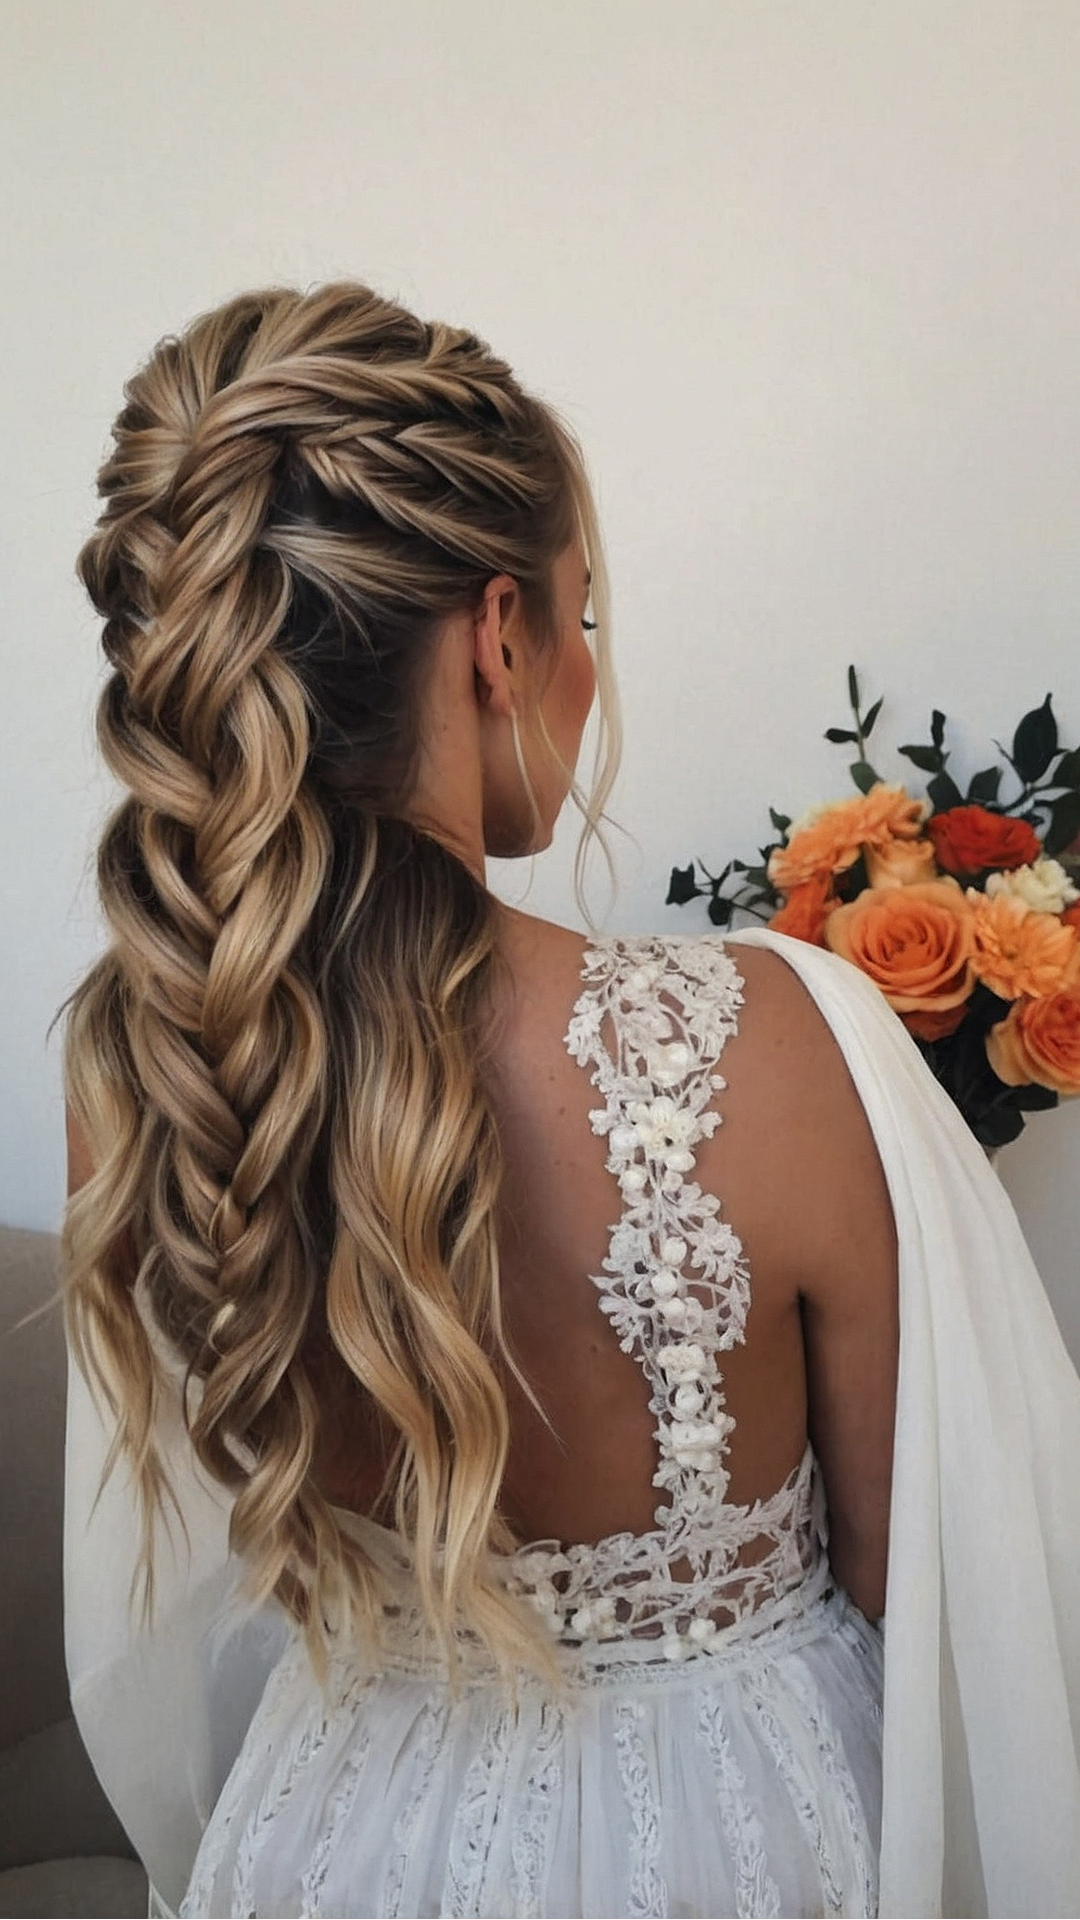 Braided Chic: Hairstyle Ideas for Any Occasion